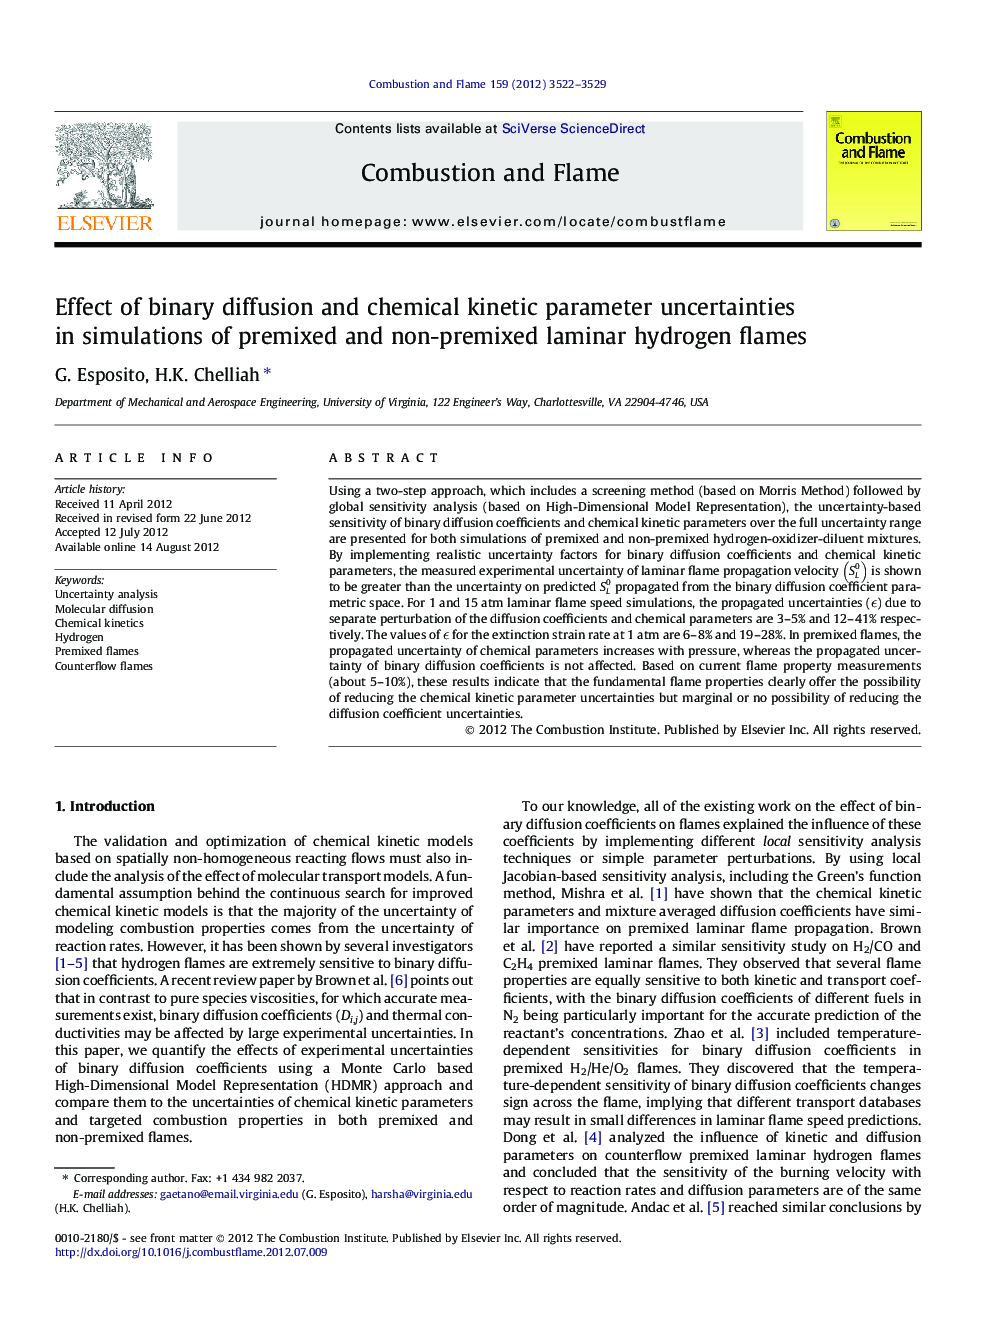 Effect of binary diffusion and chemical kinetic parameter uncertainties in simulations of premixed and non-premixed laminar hydrogen flames